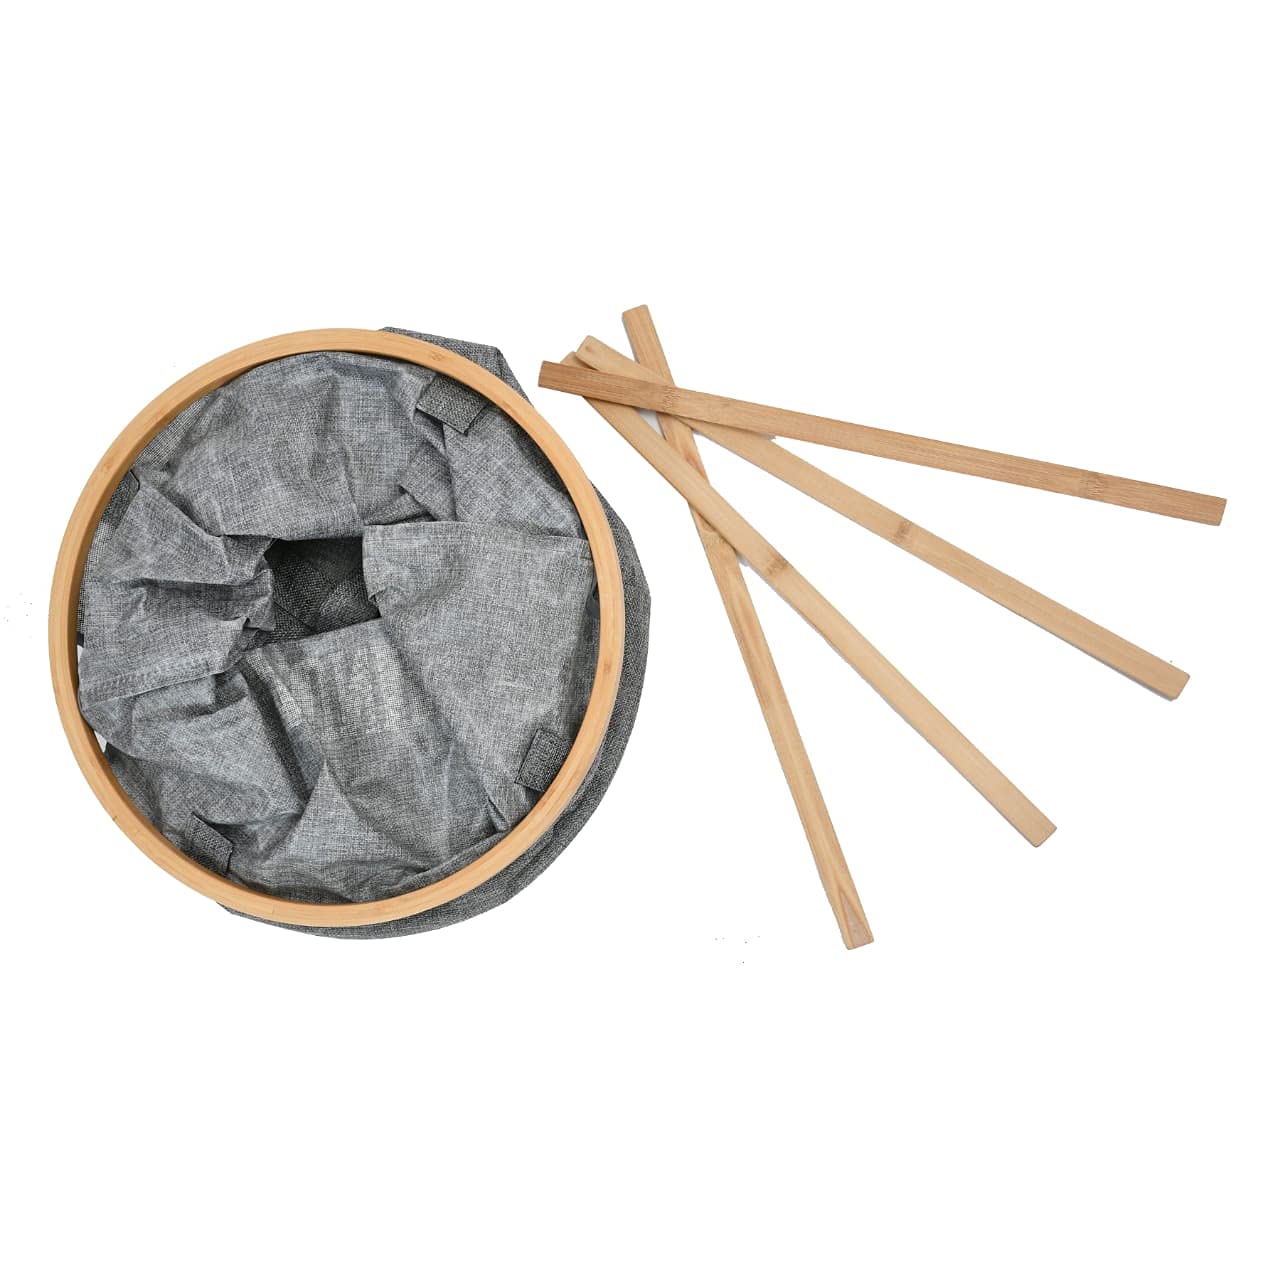 TIBÂ® Polyester Foldable Laundry Basket for Dirty Clothes,4 Wooden sticks for Support, Grey, 50-Ltr.